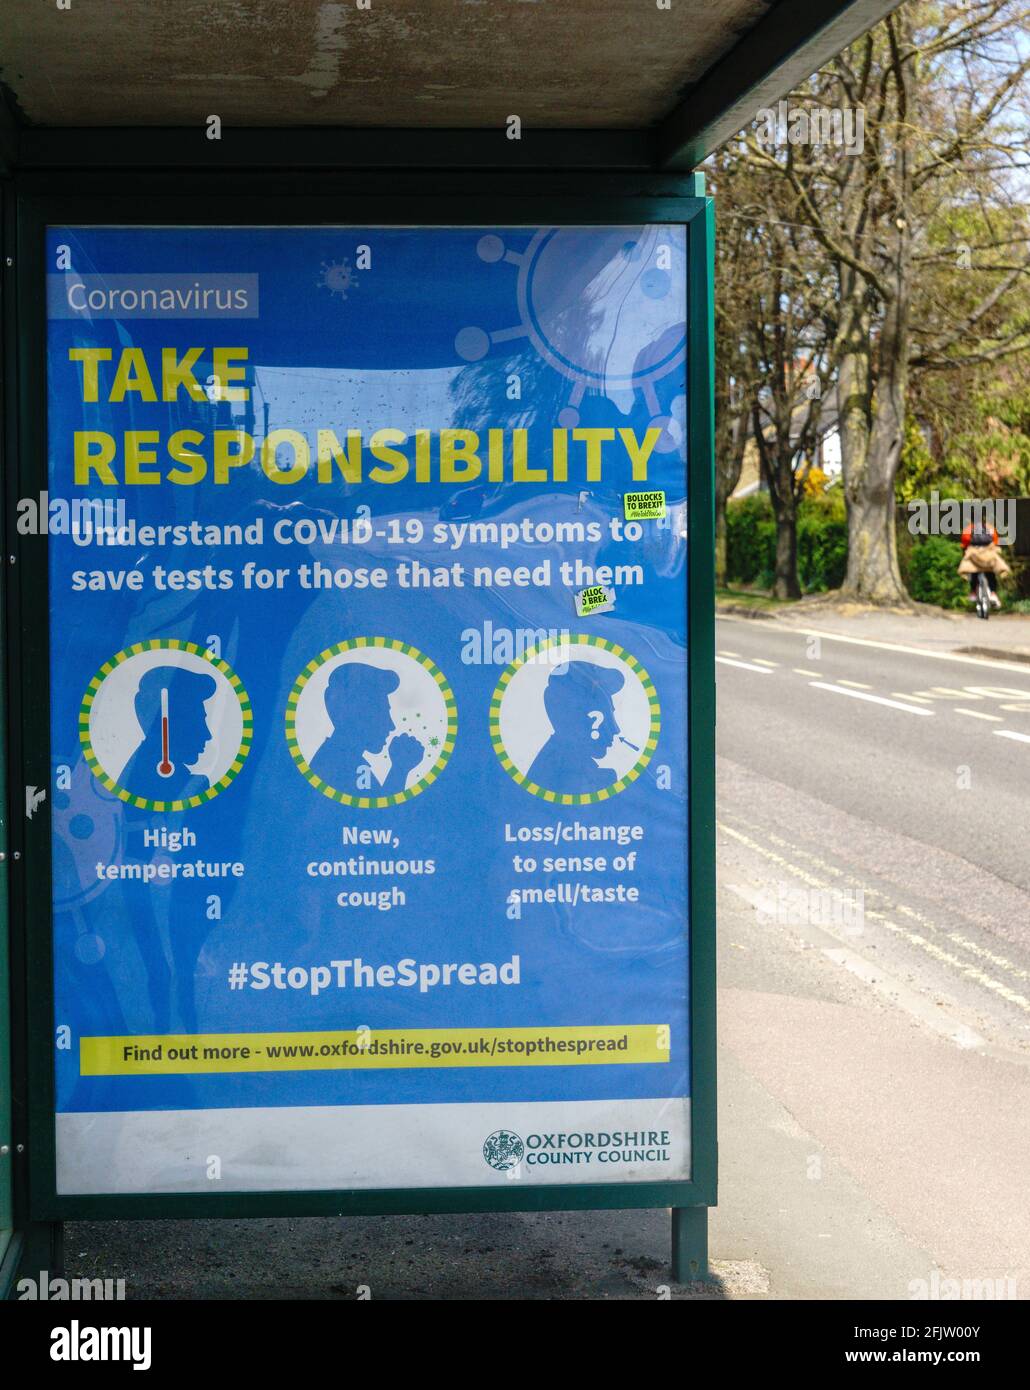 Coronavirus information placard on a bus stop in Bicester, Oxfordshire. 'Take Responsibility. Public information poster. 'Stop the spread'. Stock Photo